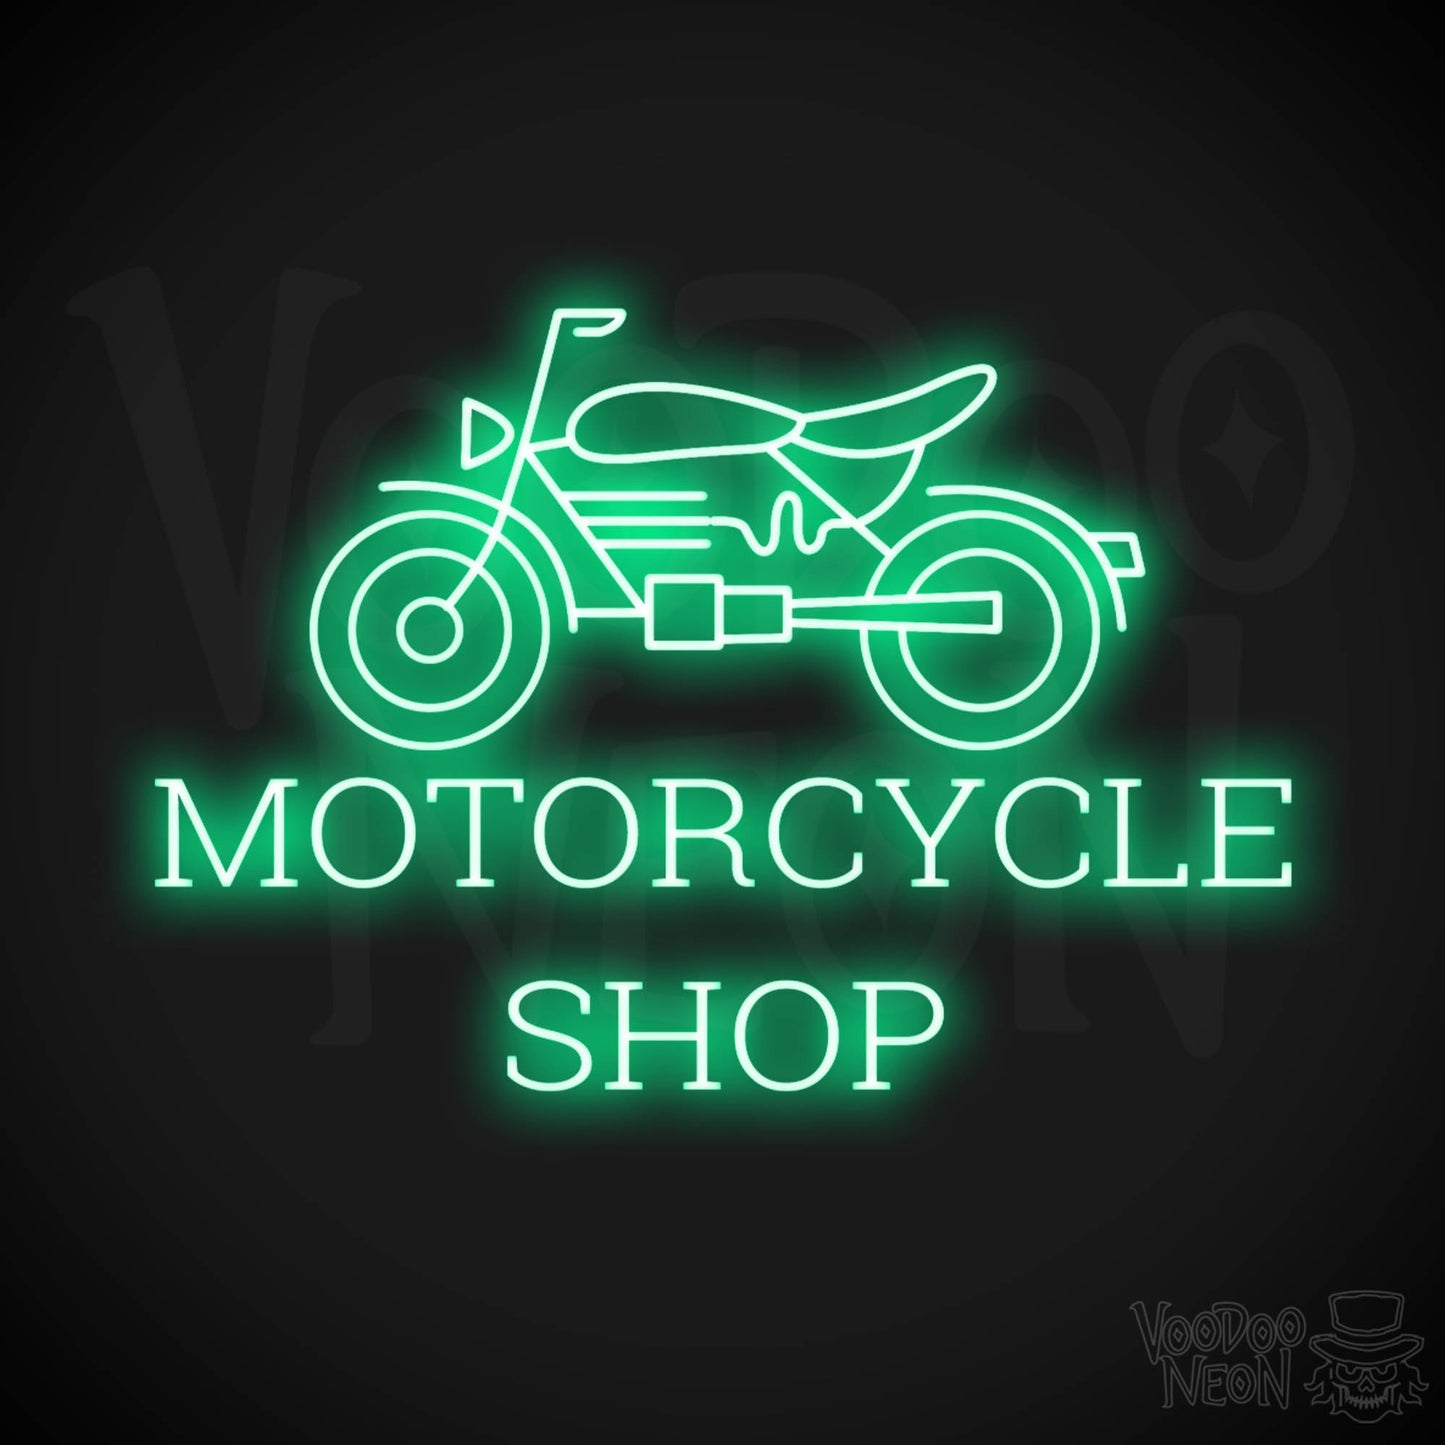 Motorcycle Shop LED Neon - Green